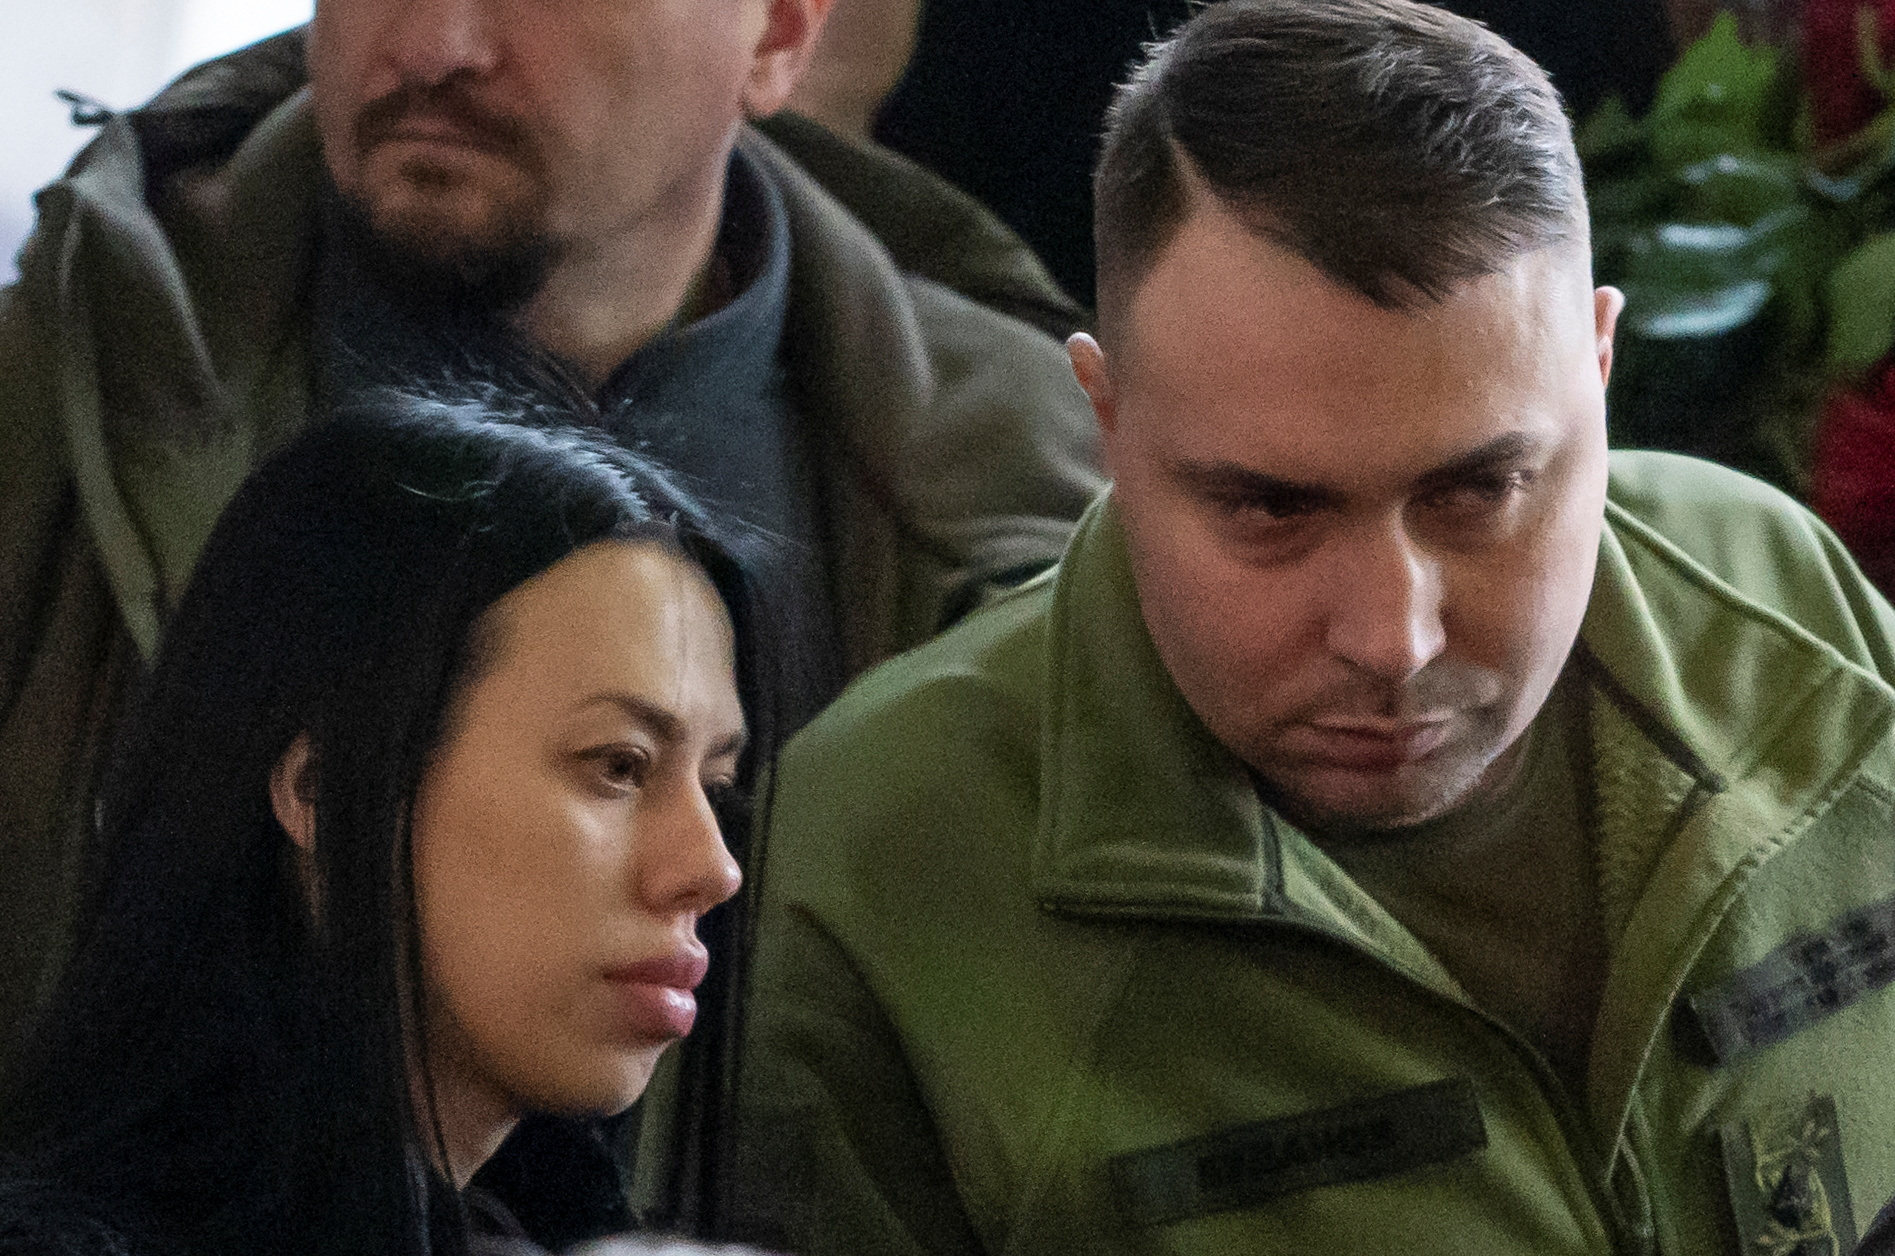 Ukraine’s military Intelligence chief Kyrylo Budanov and his wife Marianna attend a memorial ceremony in Kyiv in January. Photo: Reuters